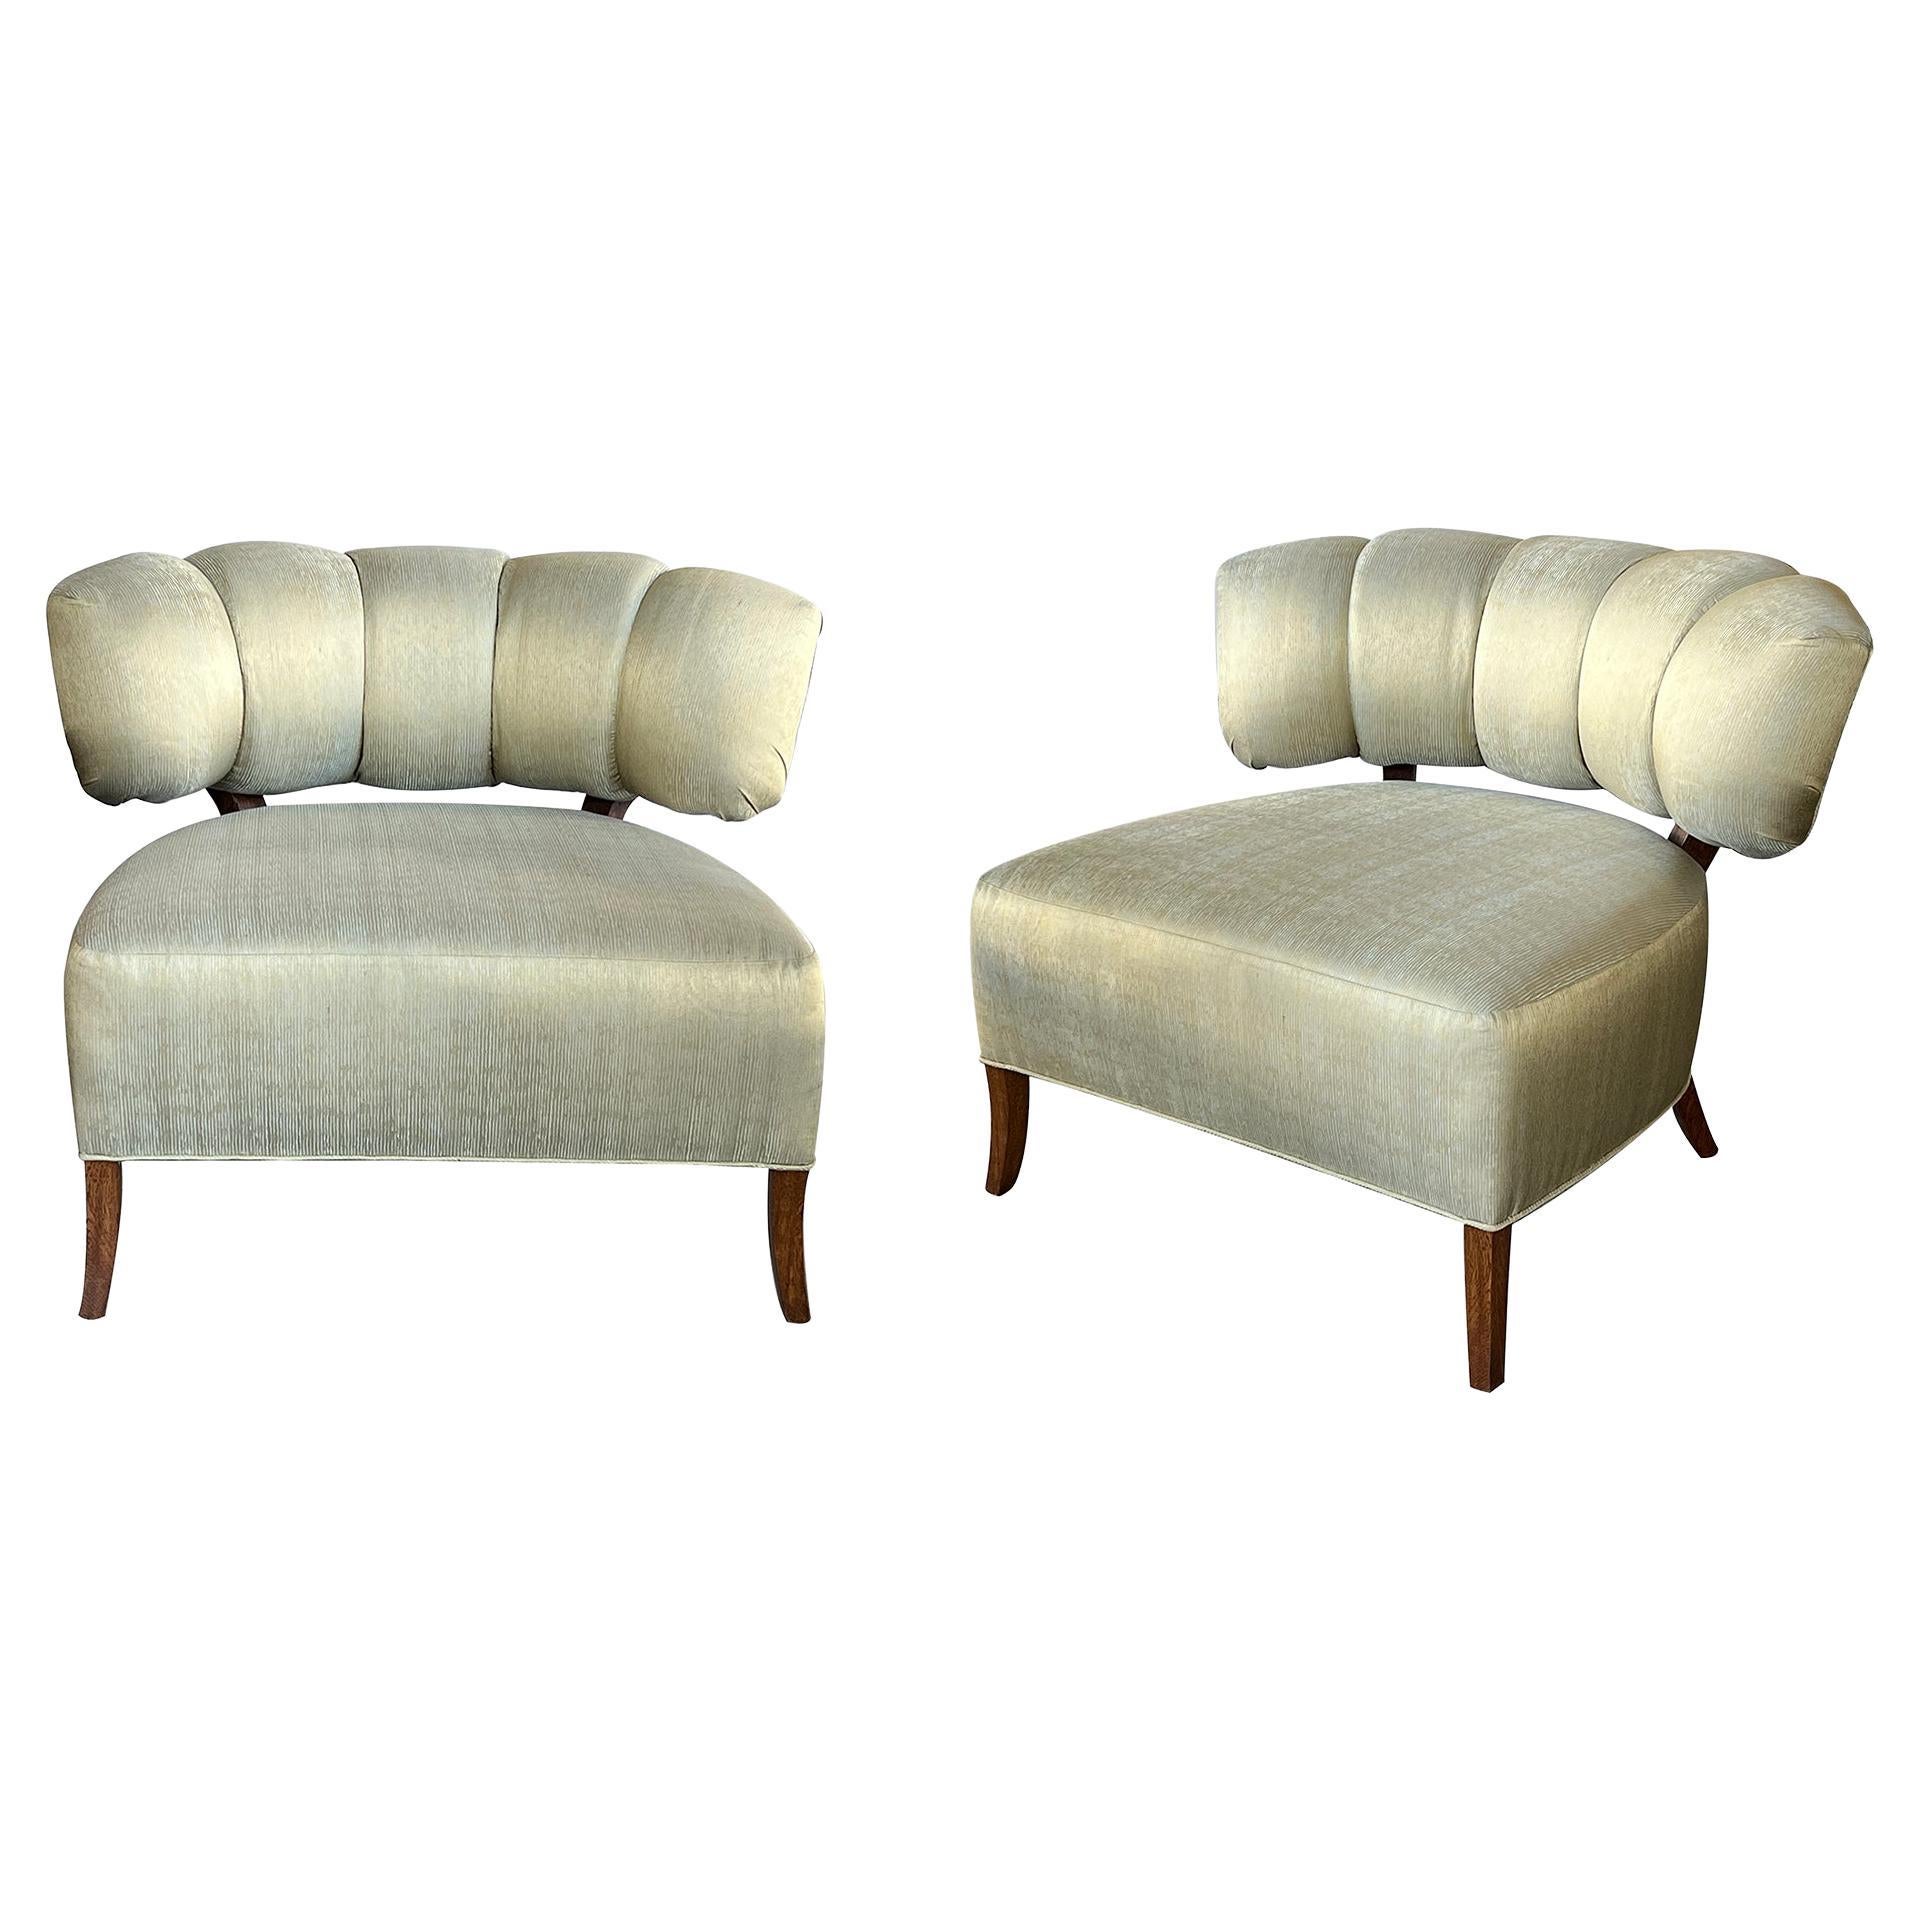 Sumptuous Pair of Billy Haines 1940's Slipper / Hostess / Lounge Chairs